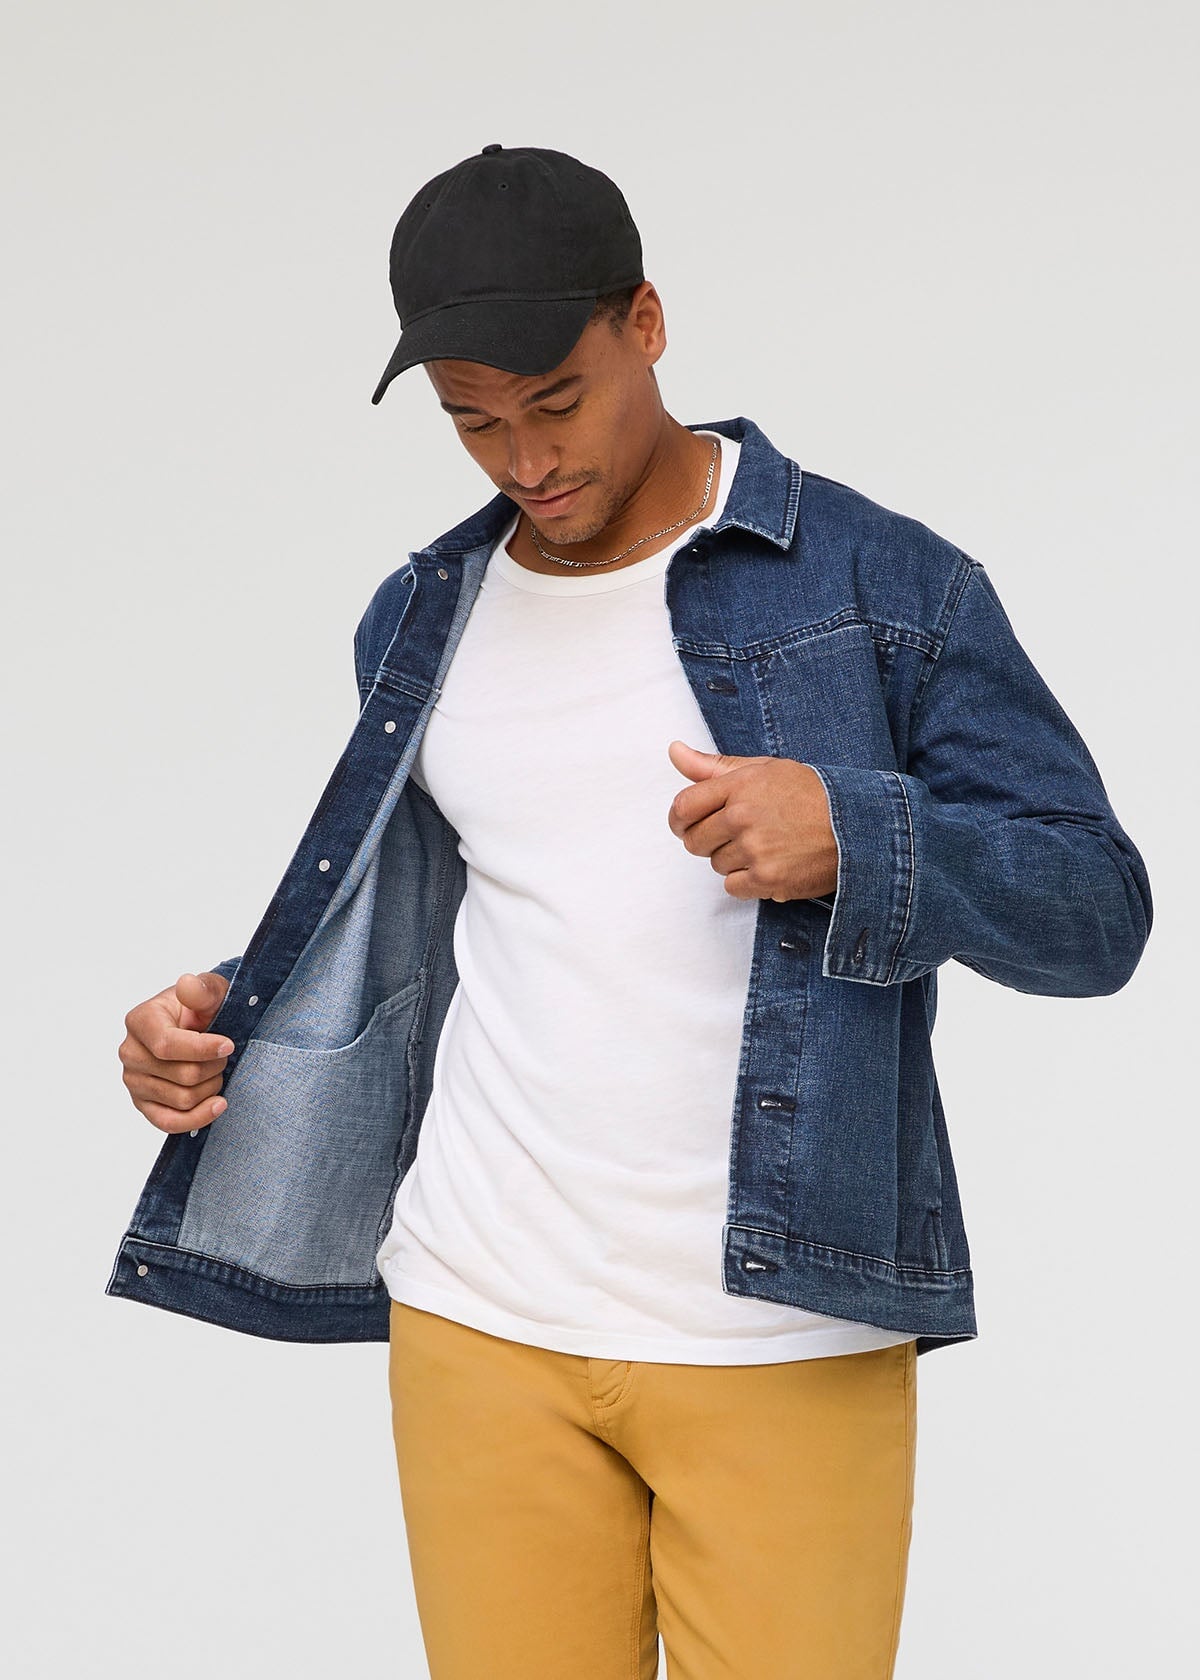 Denim Jacket Style Men Royalty-Free Images, Stock Photos & Pictures |  Shutterstock